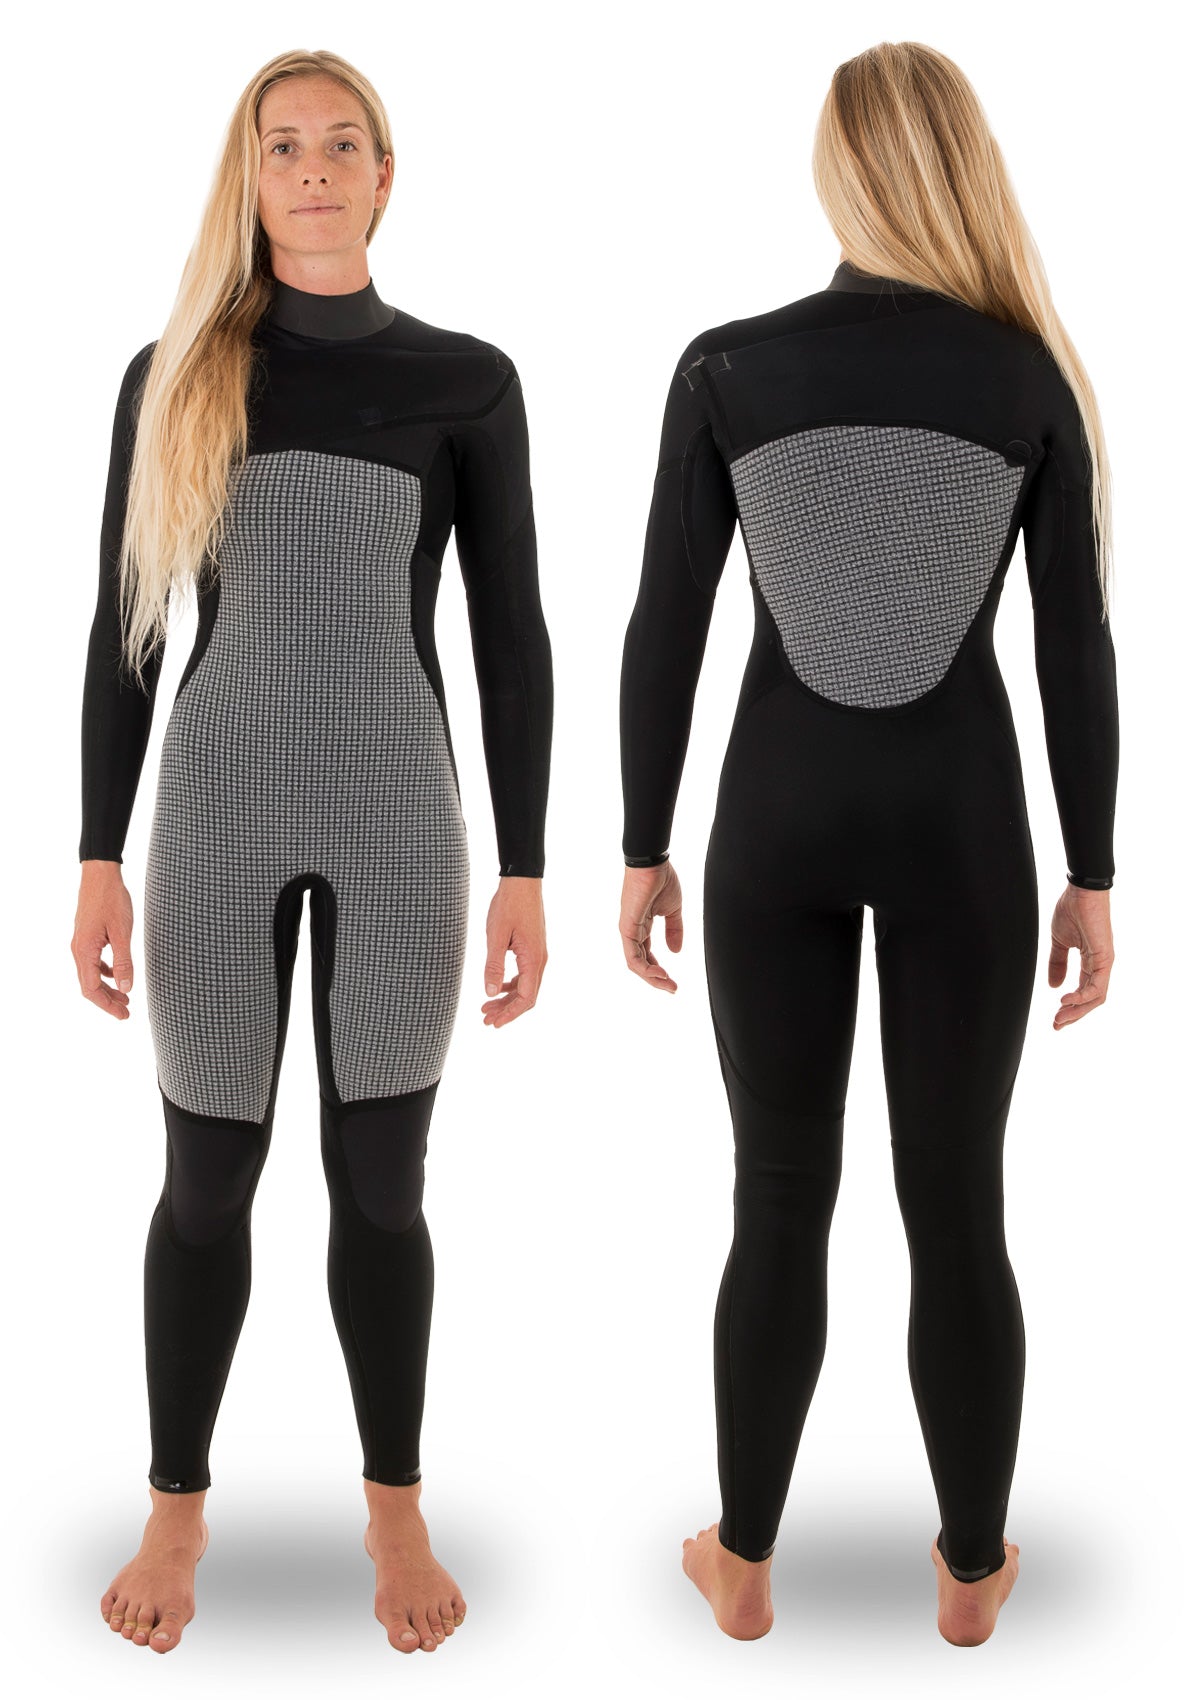 needessentials womens 4/3 chest zip thermal winter wetsuit surfing black coldwater